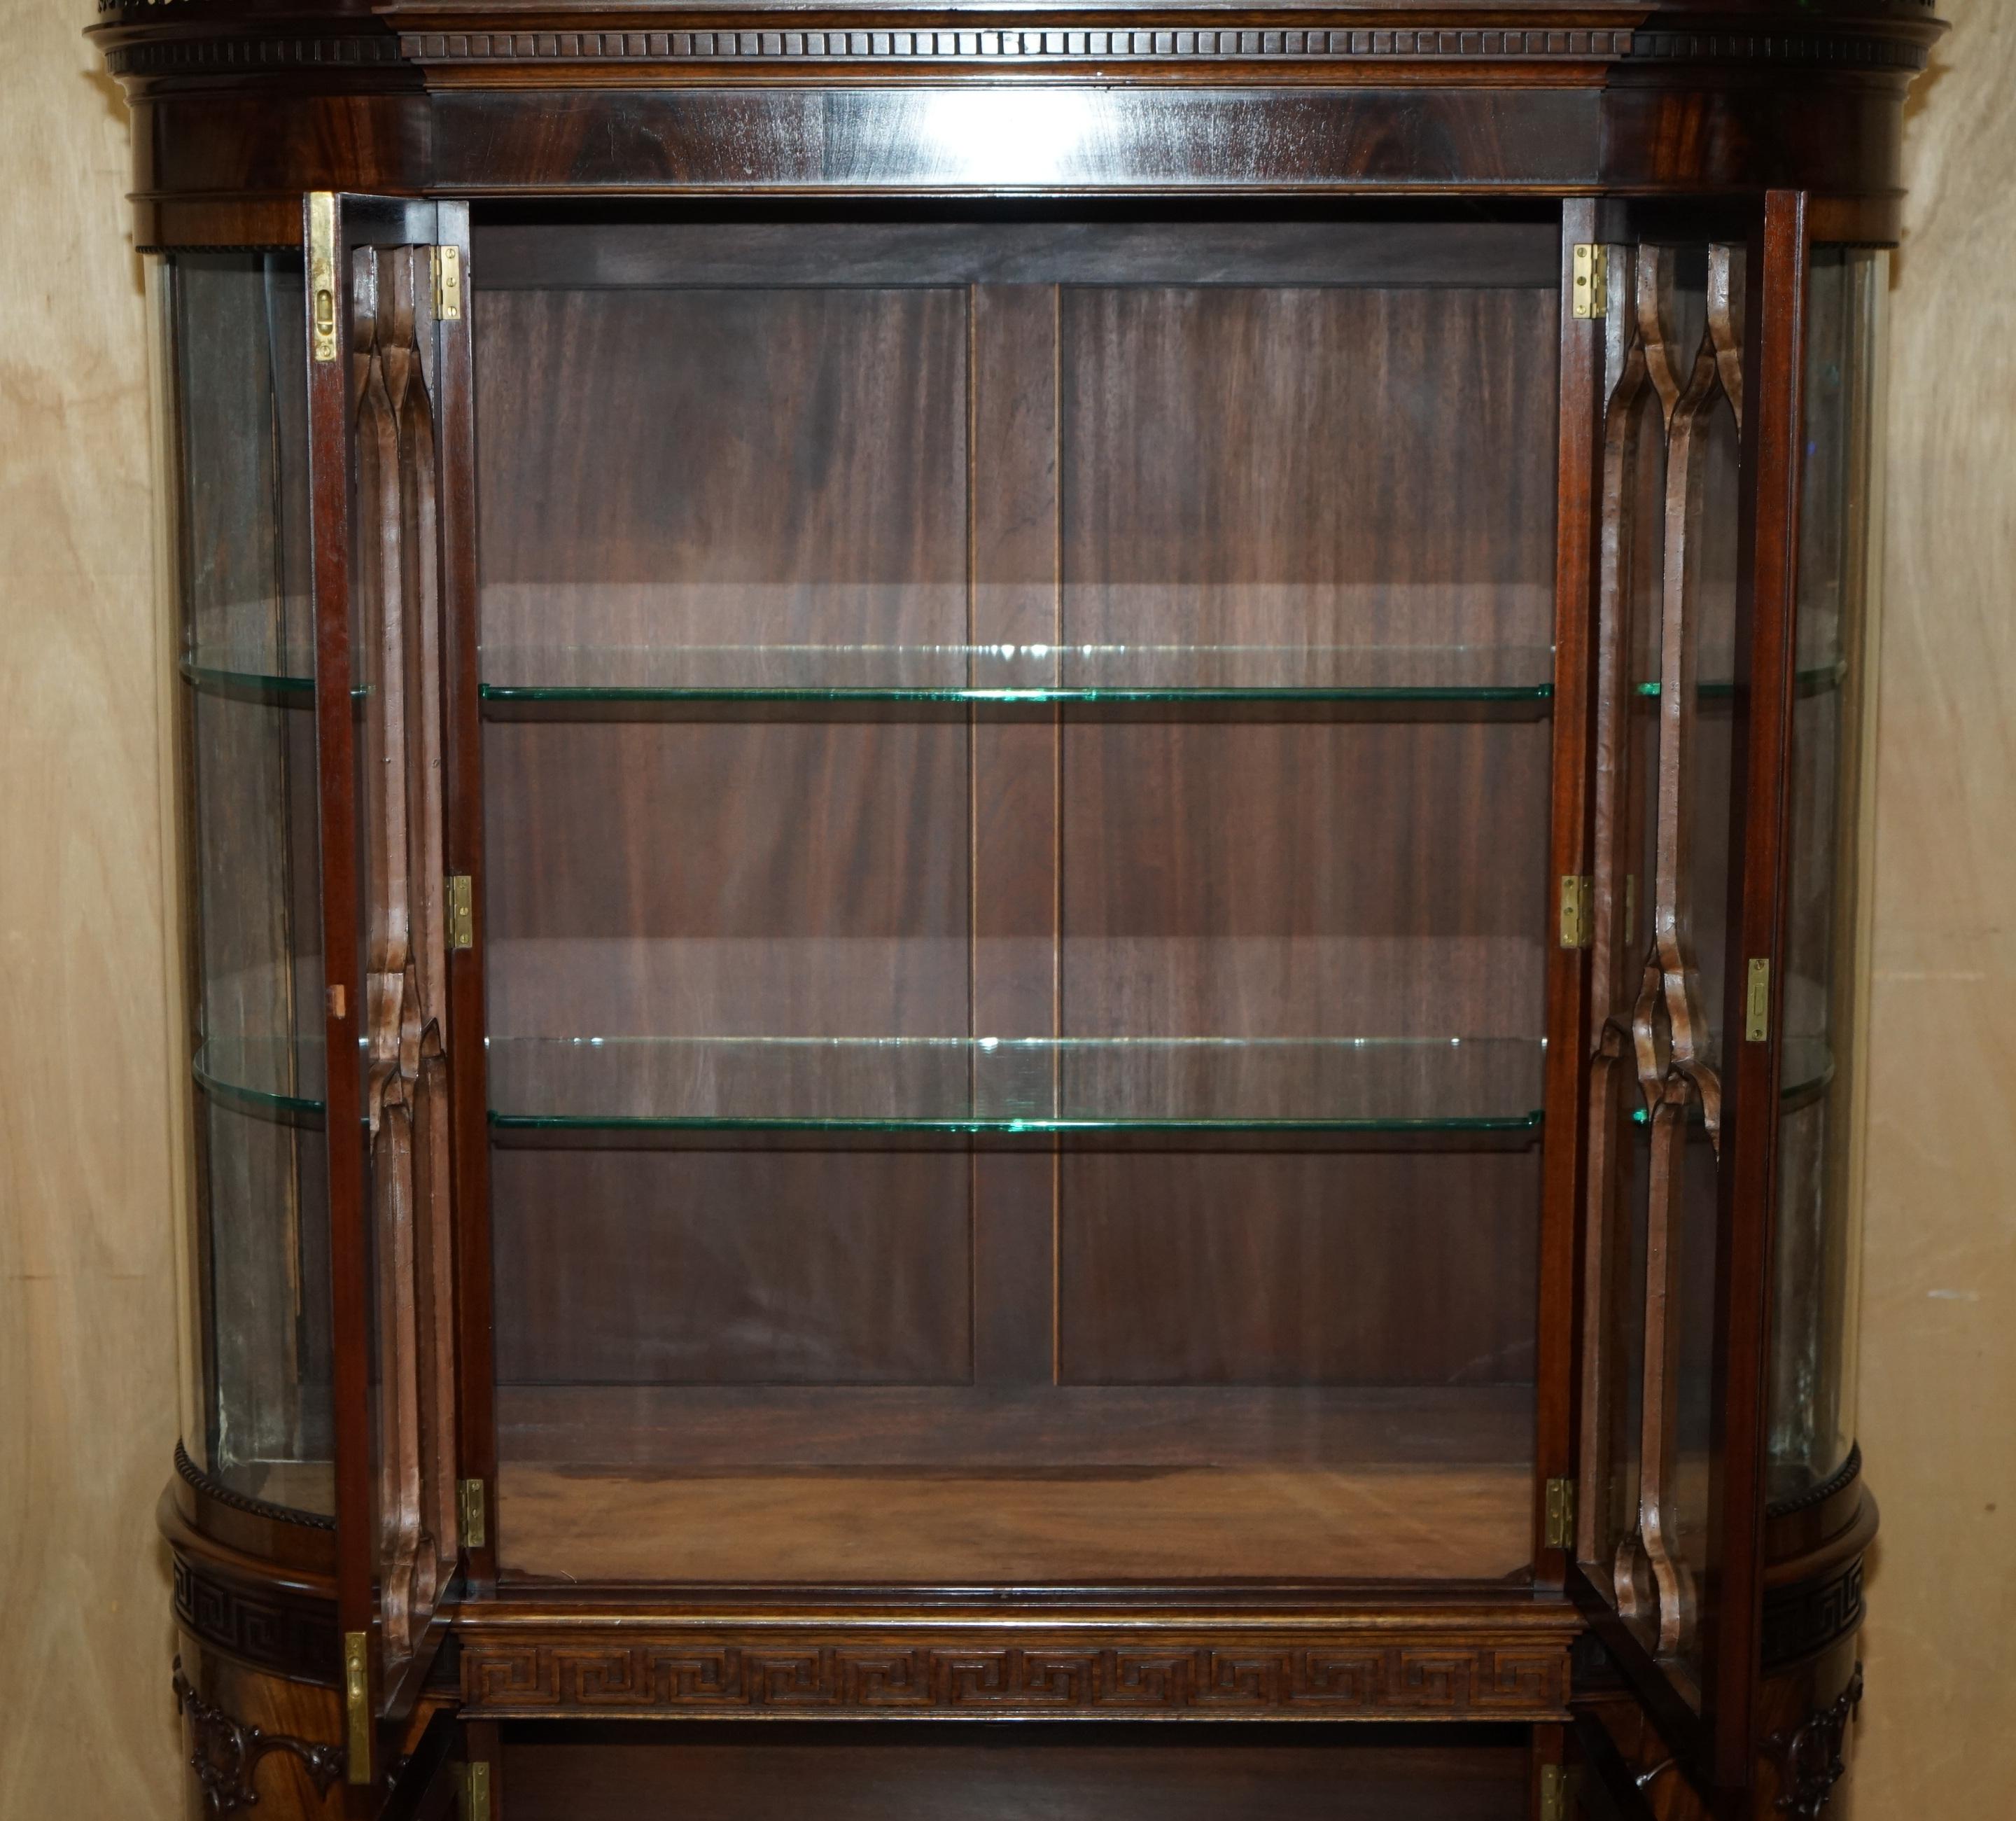 EXQUISITÉ CHARLES BAKER OF CHIPPENDALE HOUSE STAMPED DISPLAY CABINET en vente 12